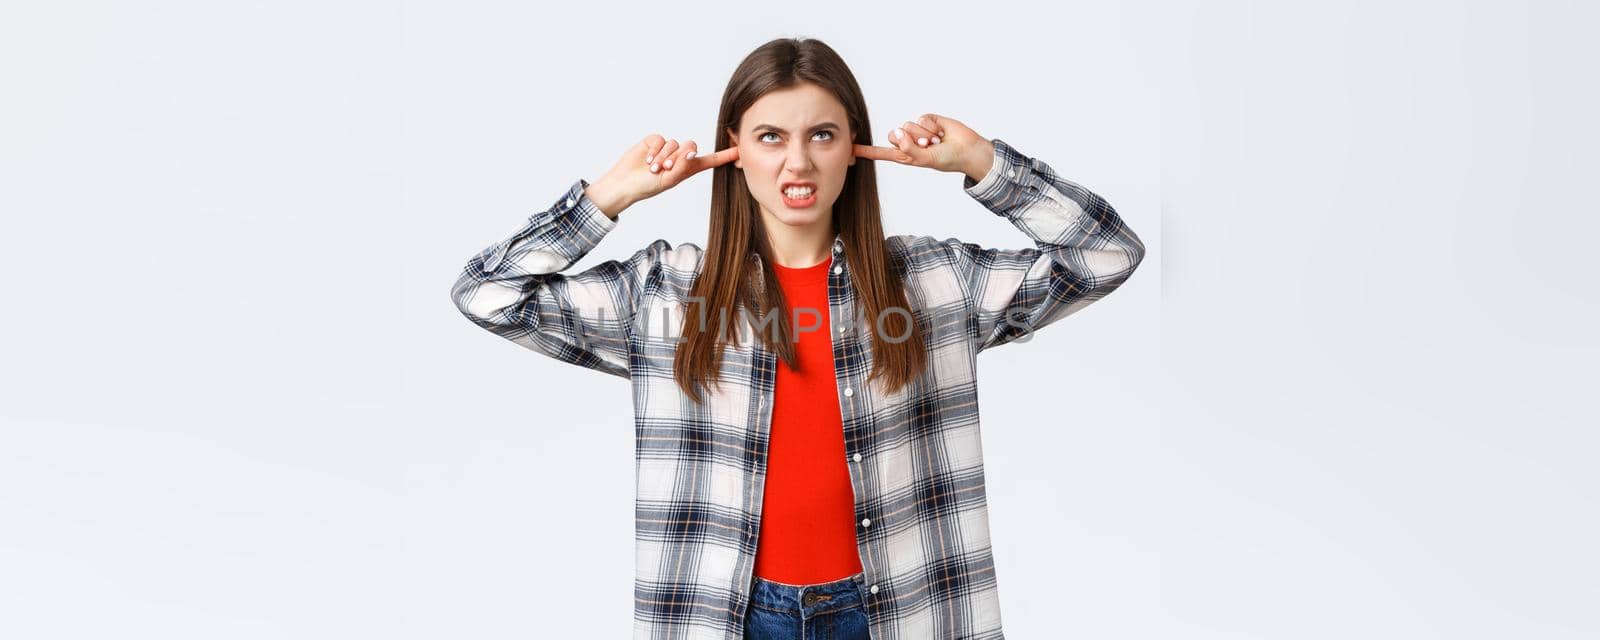 Lifestyle, different emotions, leisure activities concept. Pissed-off angry young female student in dormitory bothered by loud neighbours upstairs, staring up furious, shut ears from noisy music by Benzoix